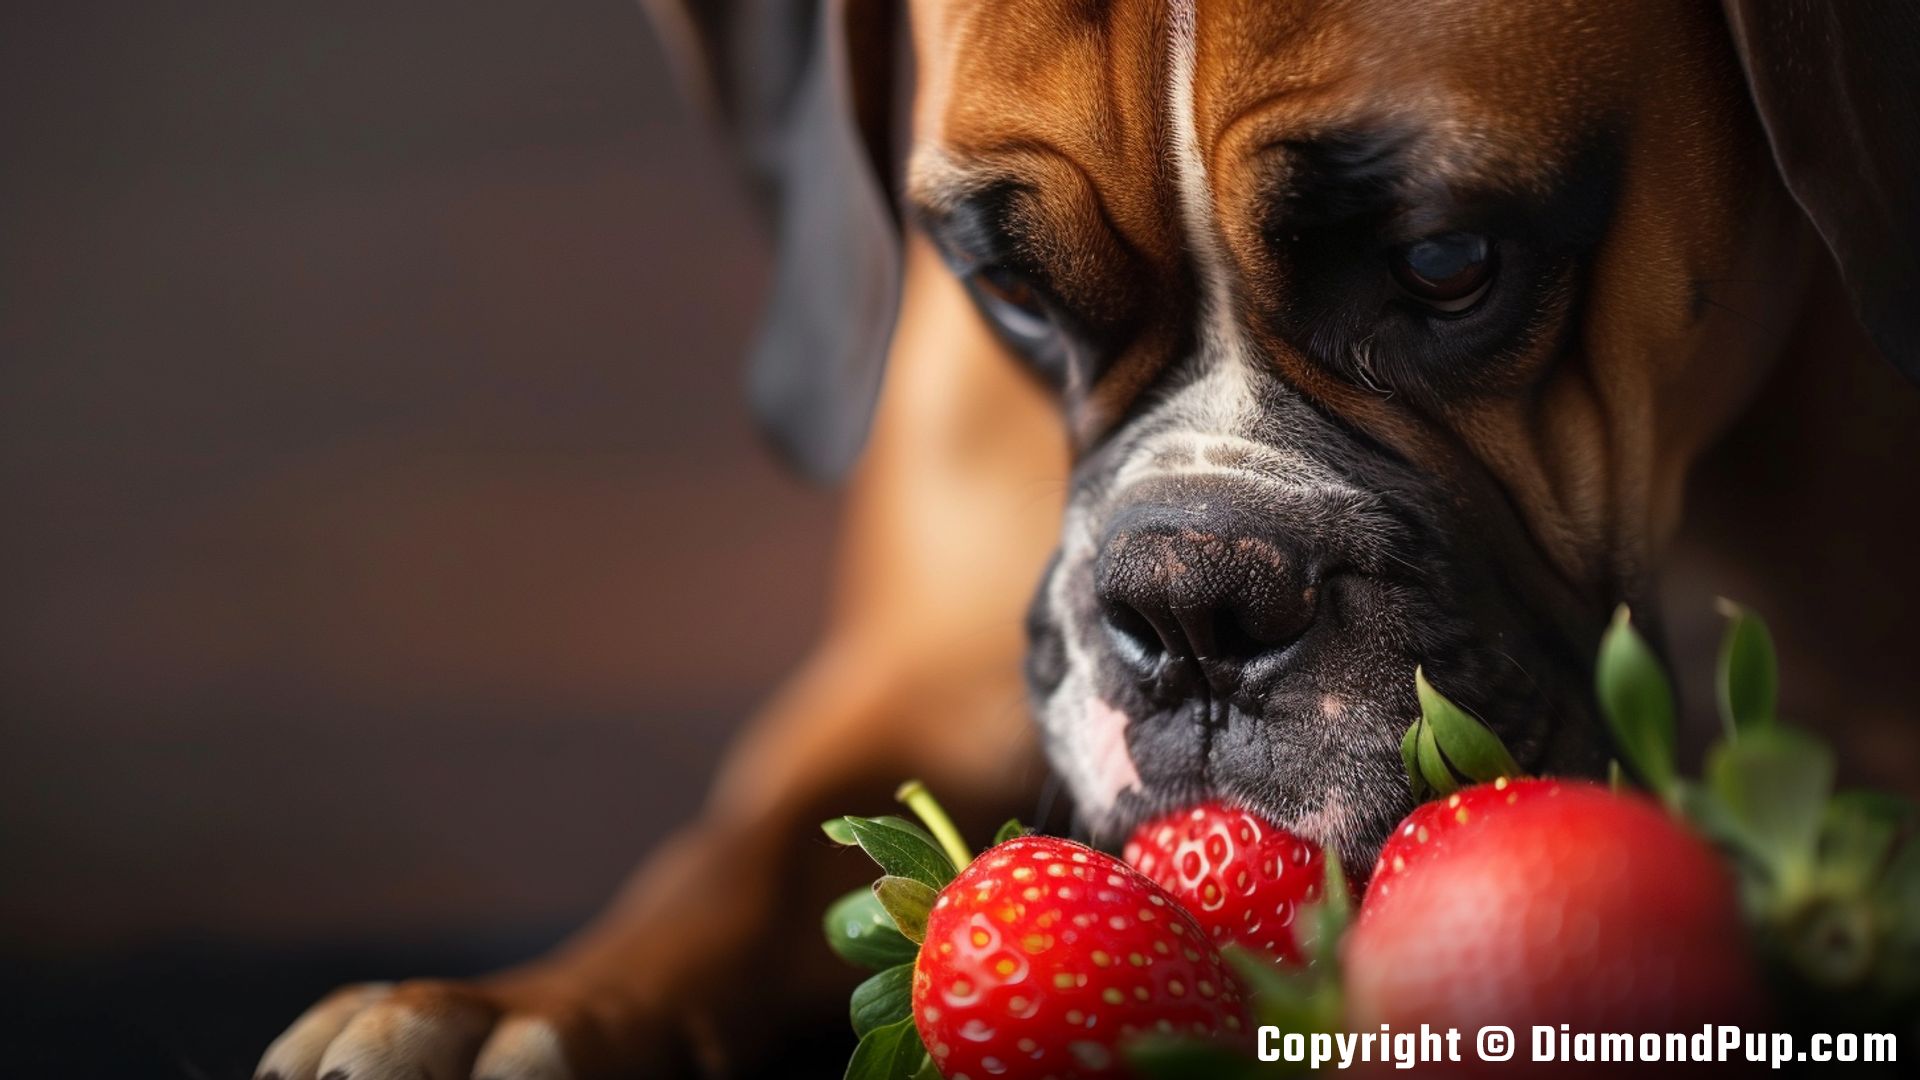 Image of a Playful Boxer Eating Strawberries